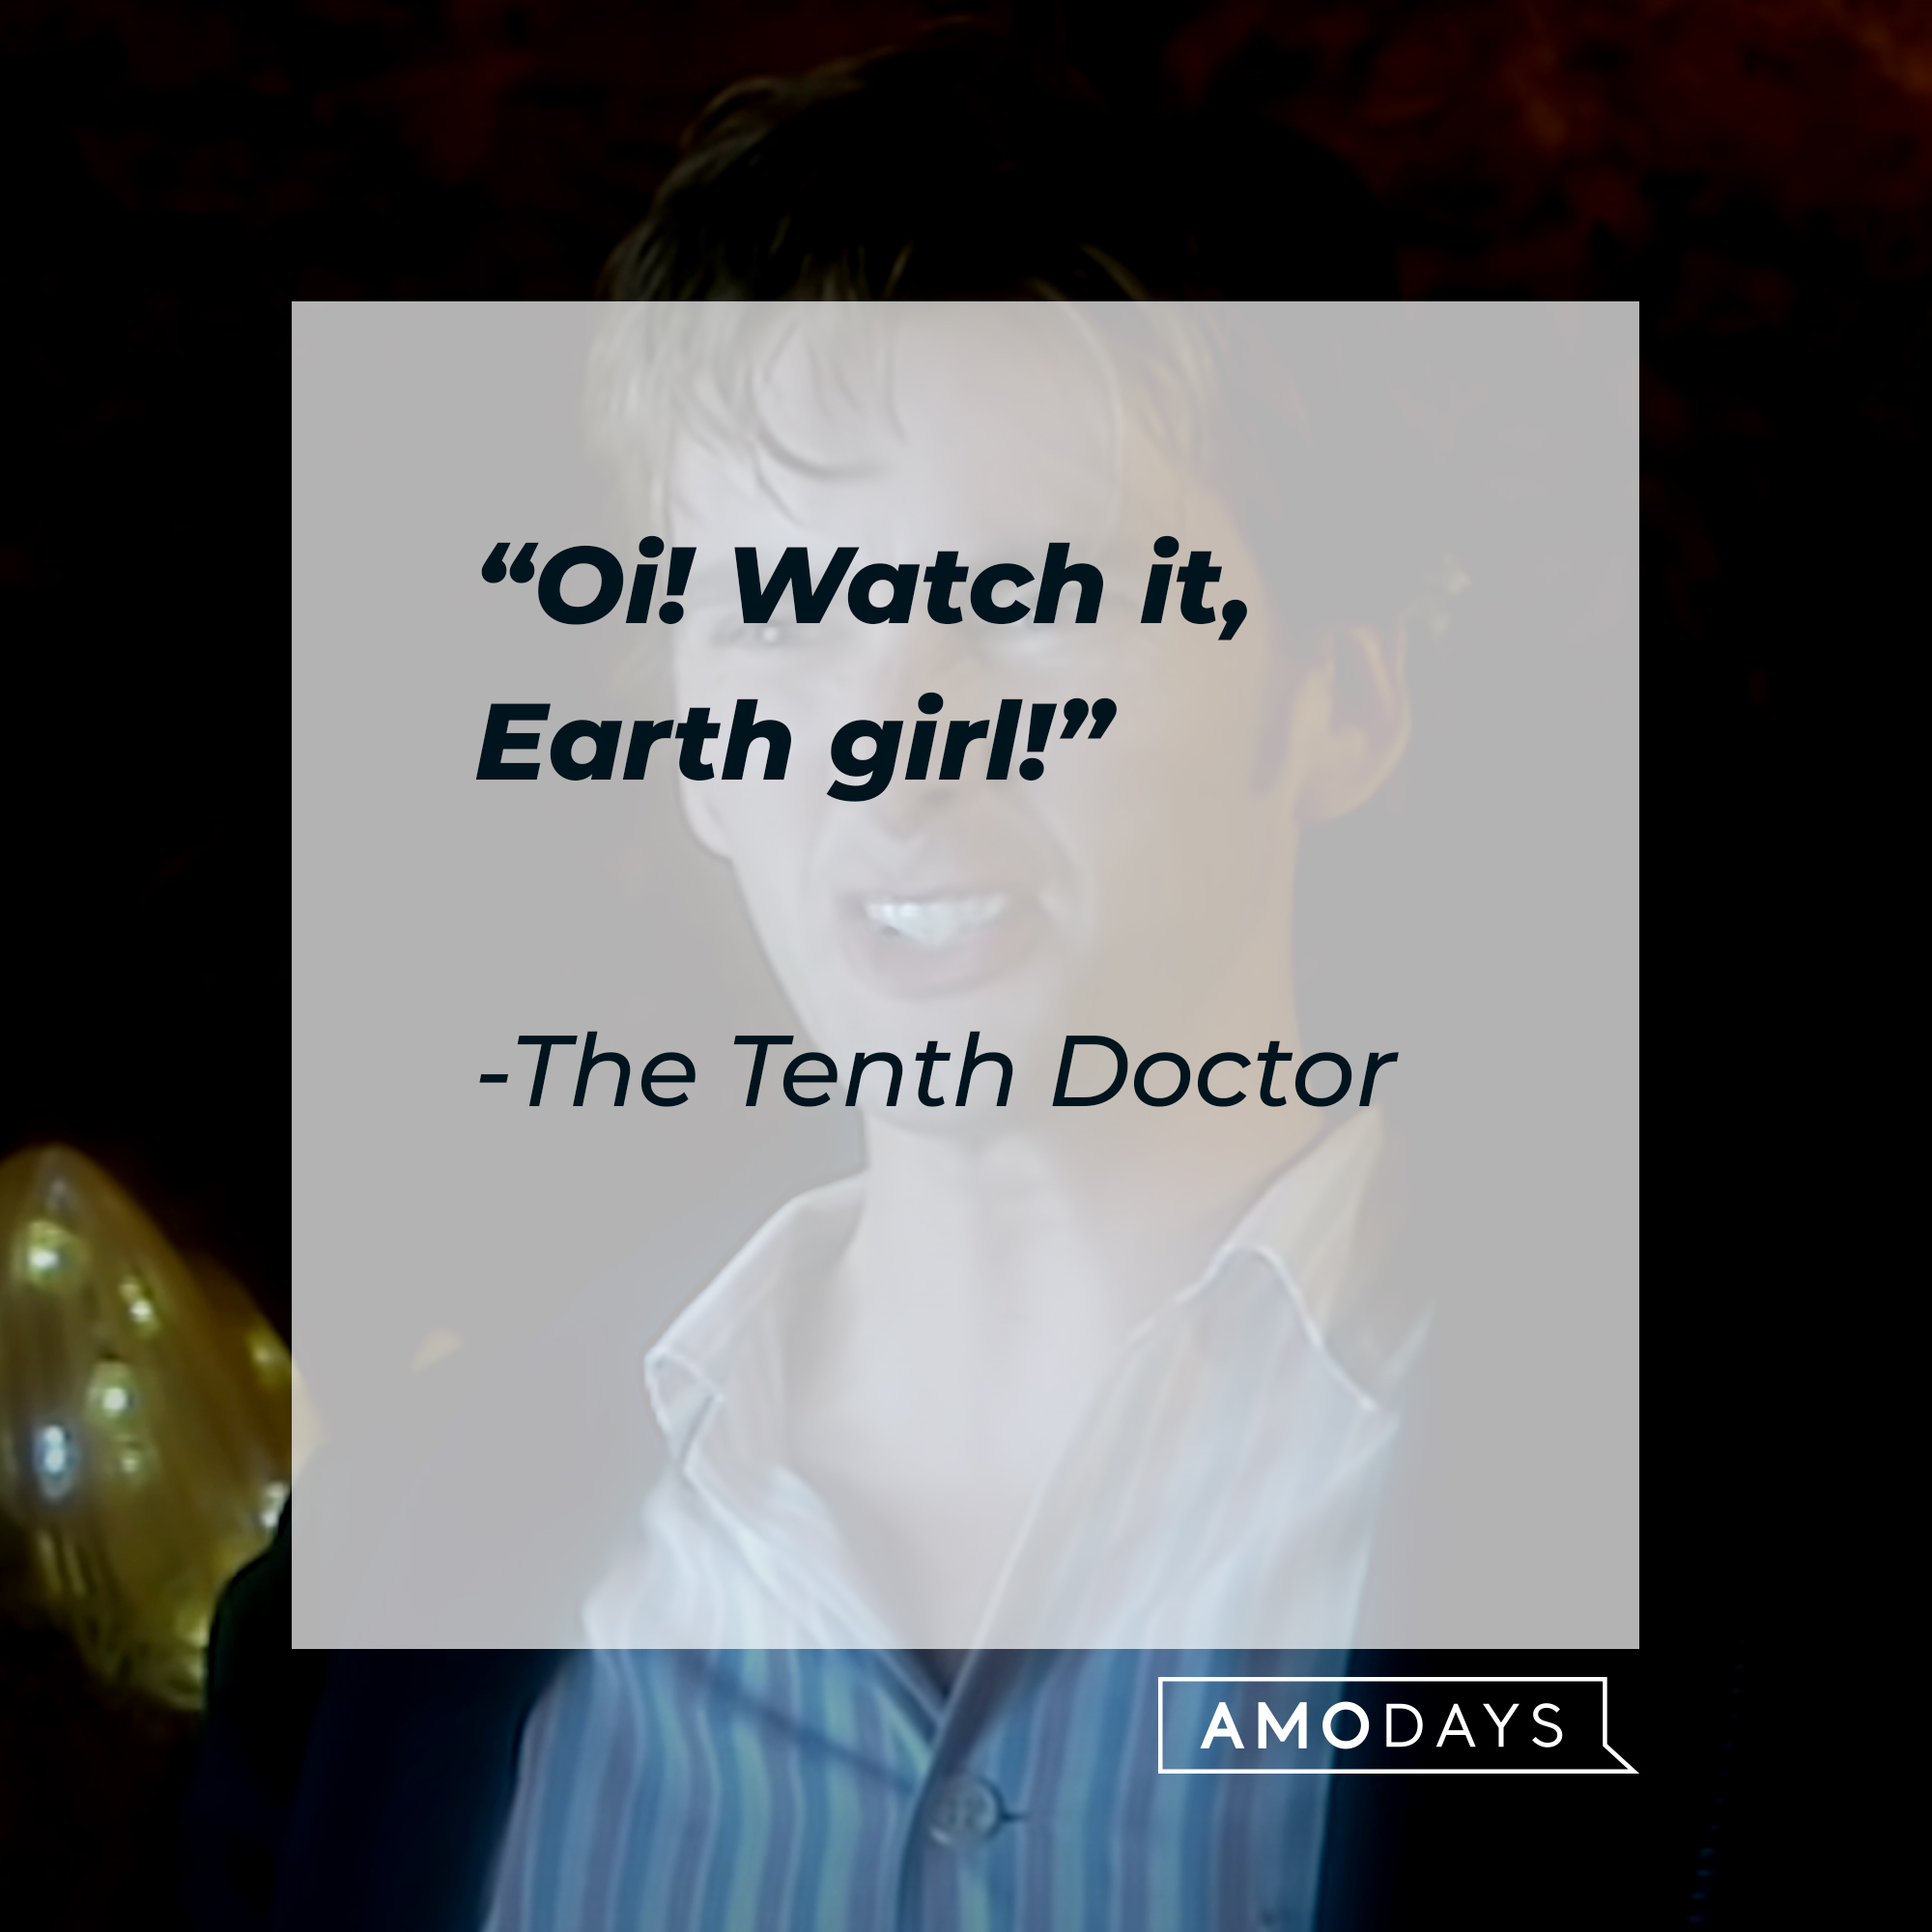 The Tenth Doctor's quote: "Oi! Watch it, Earth girl!" | Source: youtube.com/DoctorWho